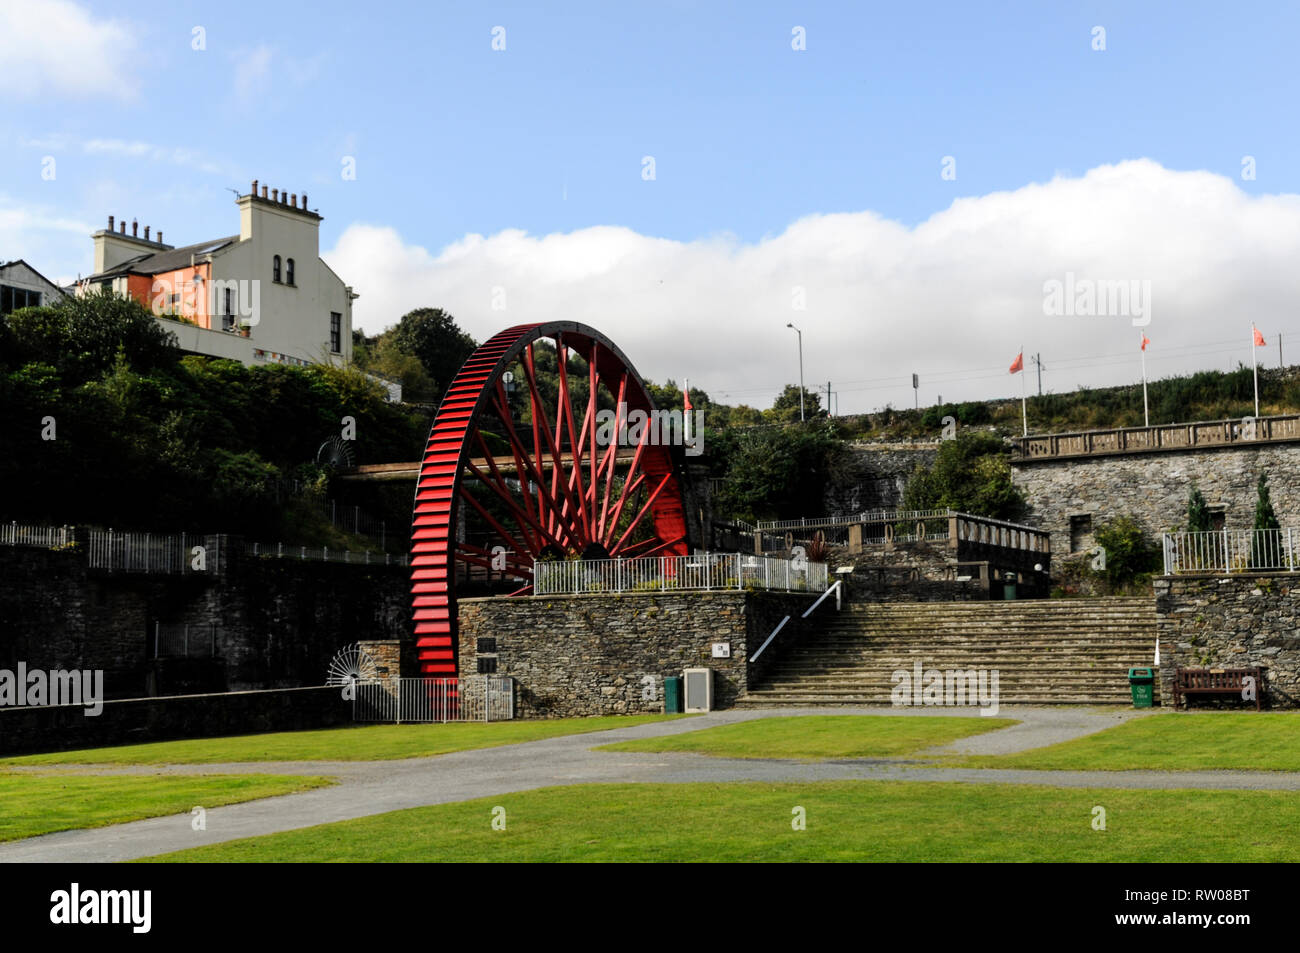 The smaller waterwheel at Laxey is called the Snaefell Wheel (also known as Lady Evelyn), and is situated 700 meter south of the larger Laxey Wheel in Stock Photo